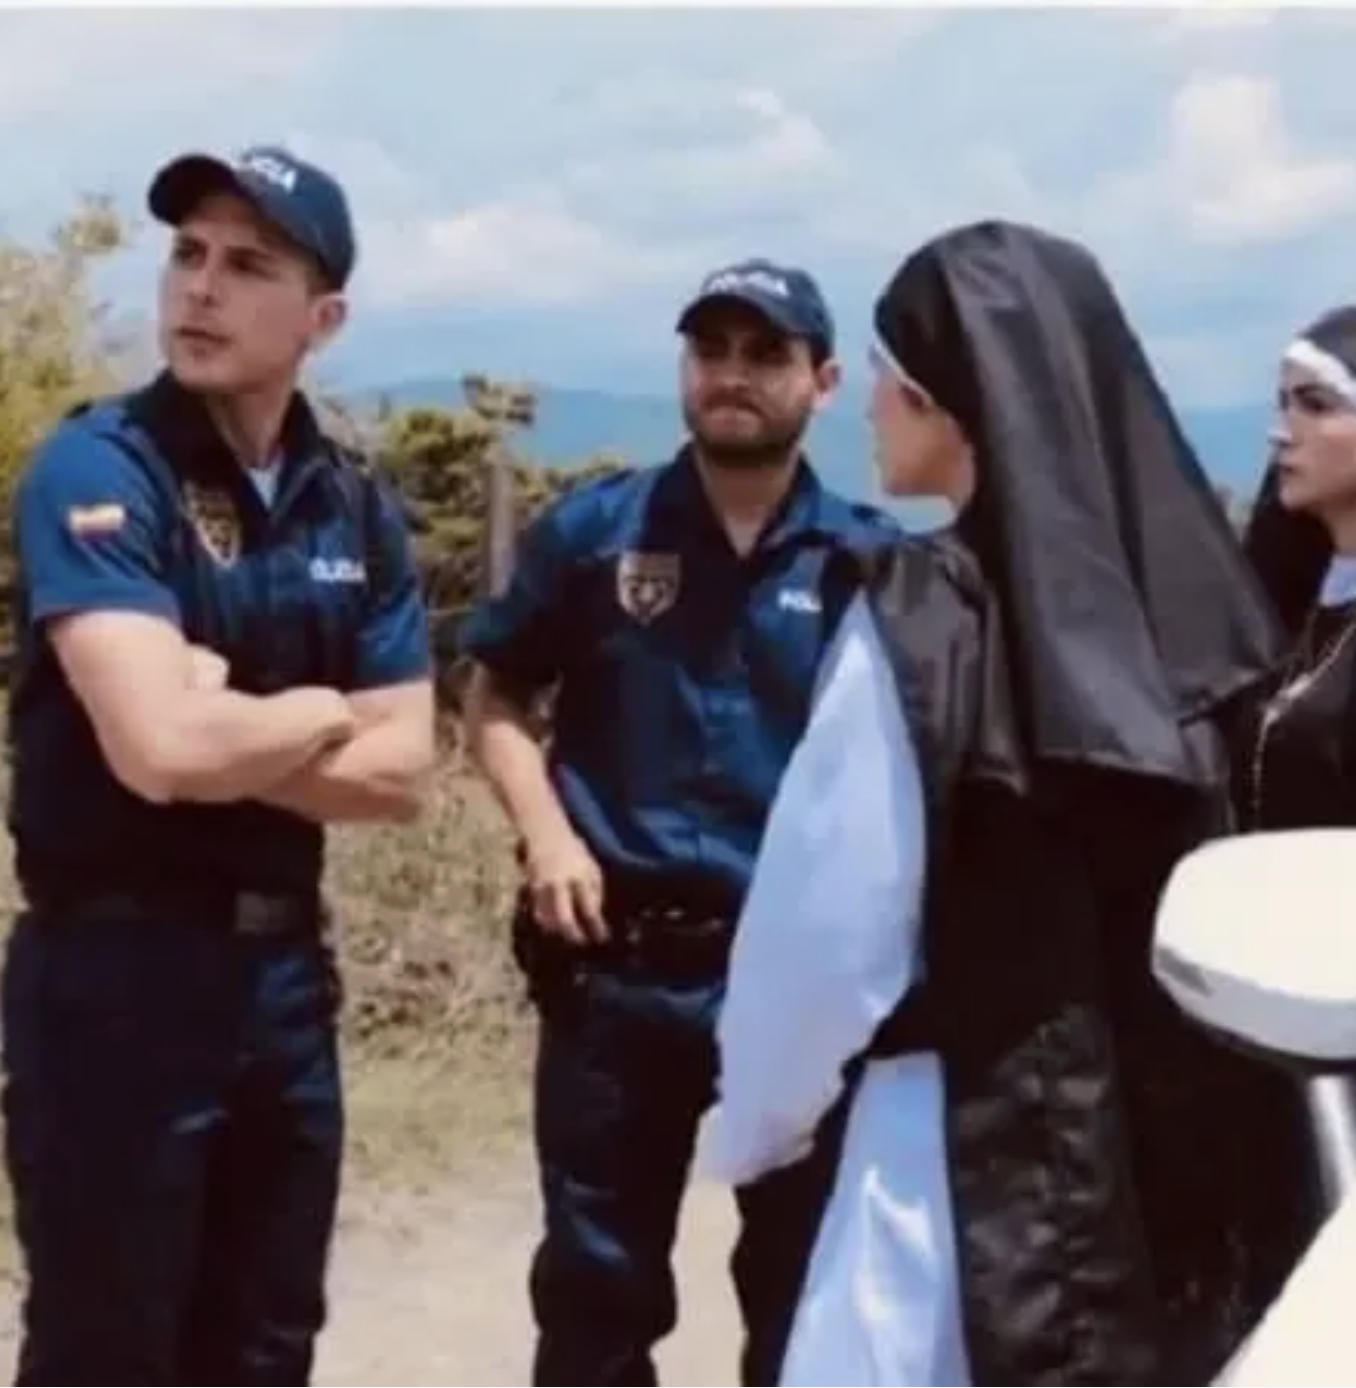 2 white nuns being searched by police special video